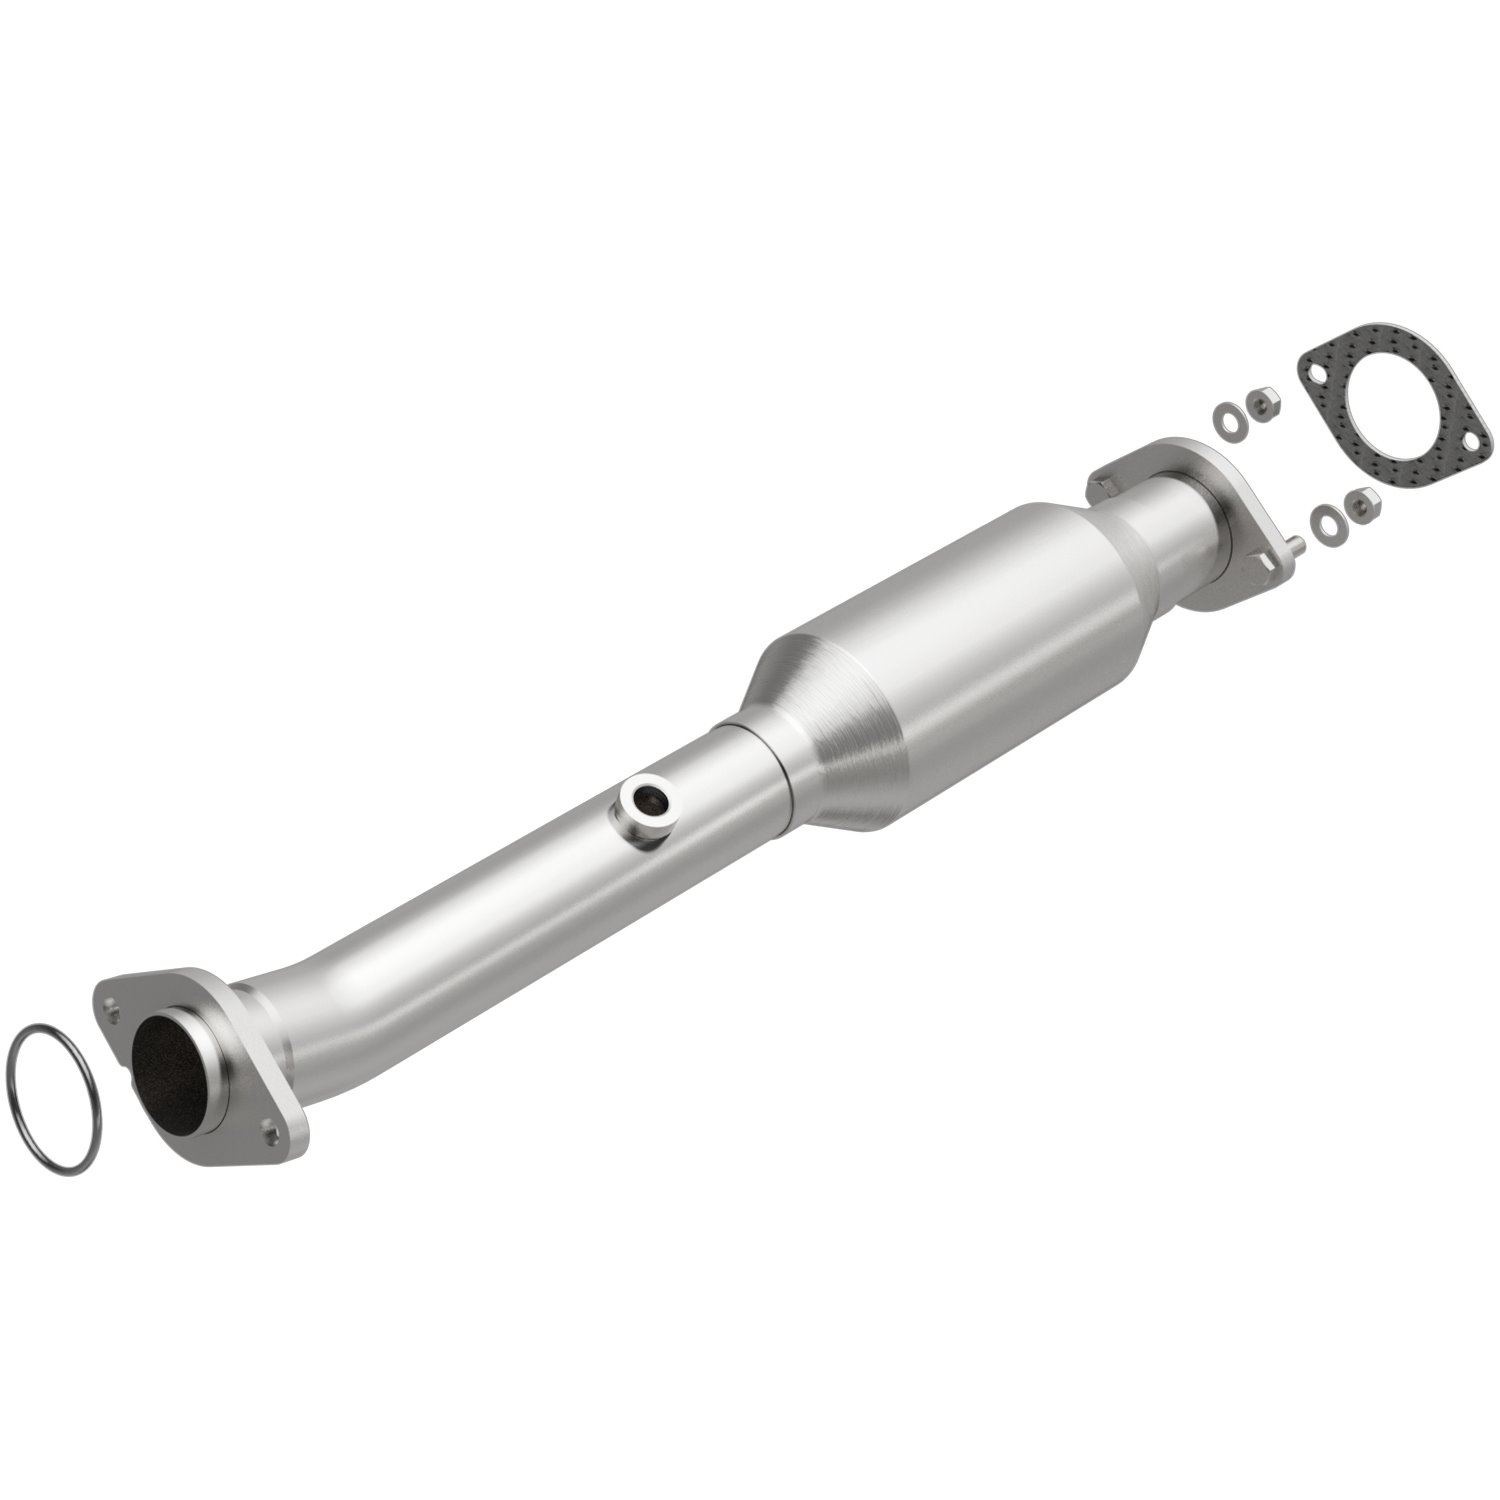 OEM Grade Federal / EPA Compliant Direct-Fit Catalytic Converter 21-041